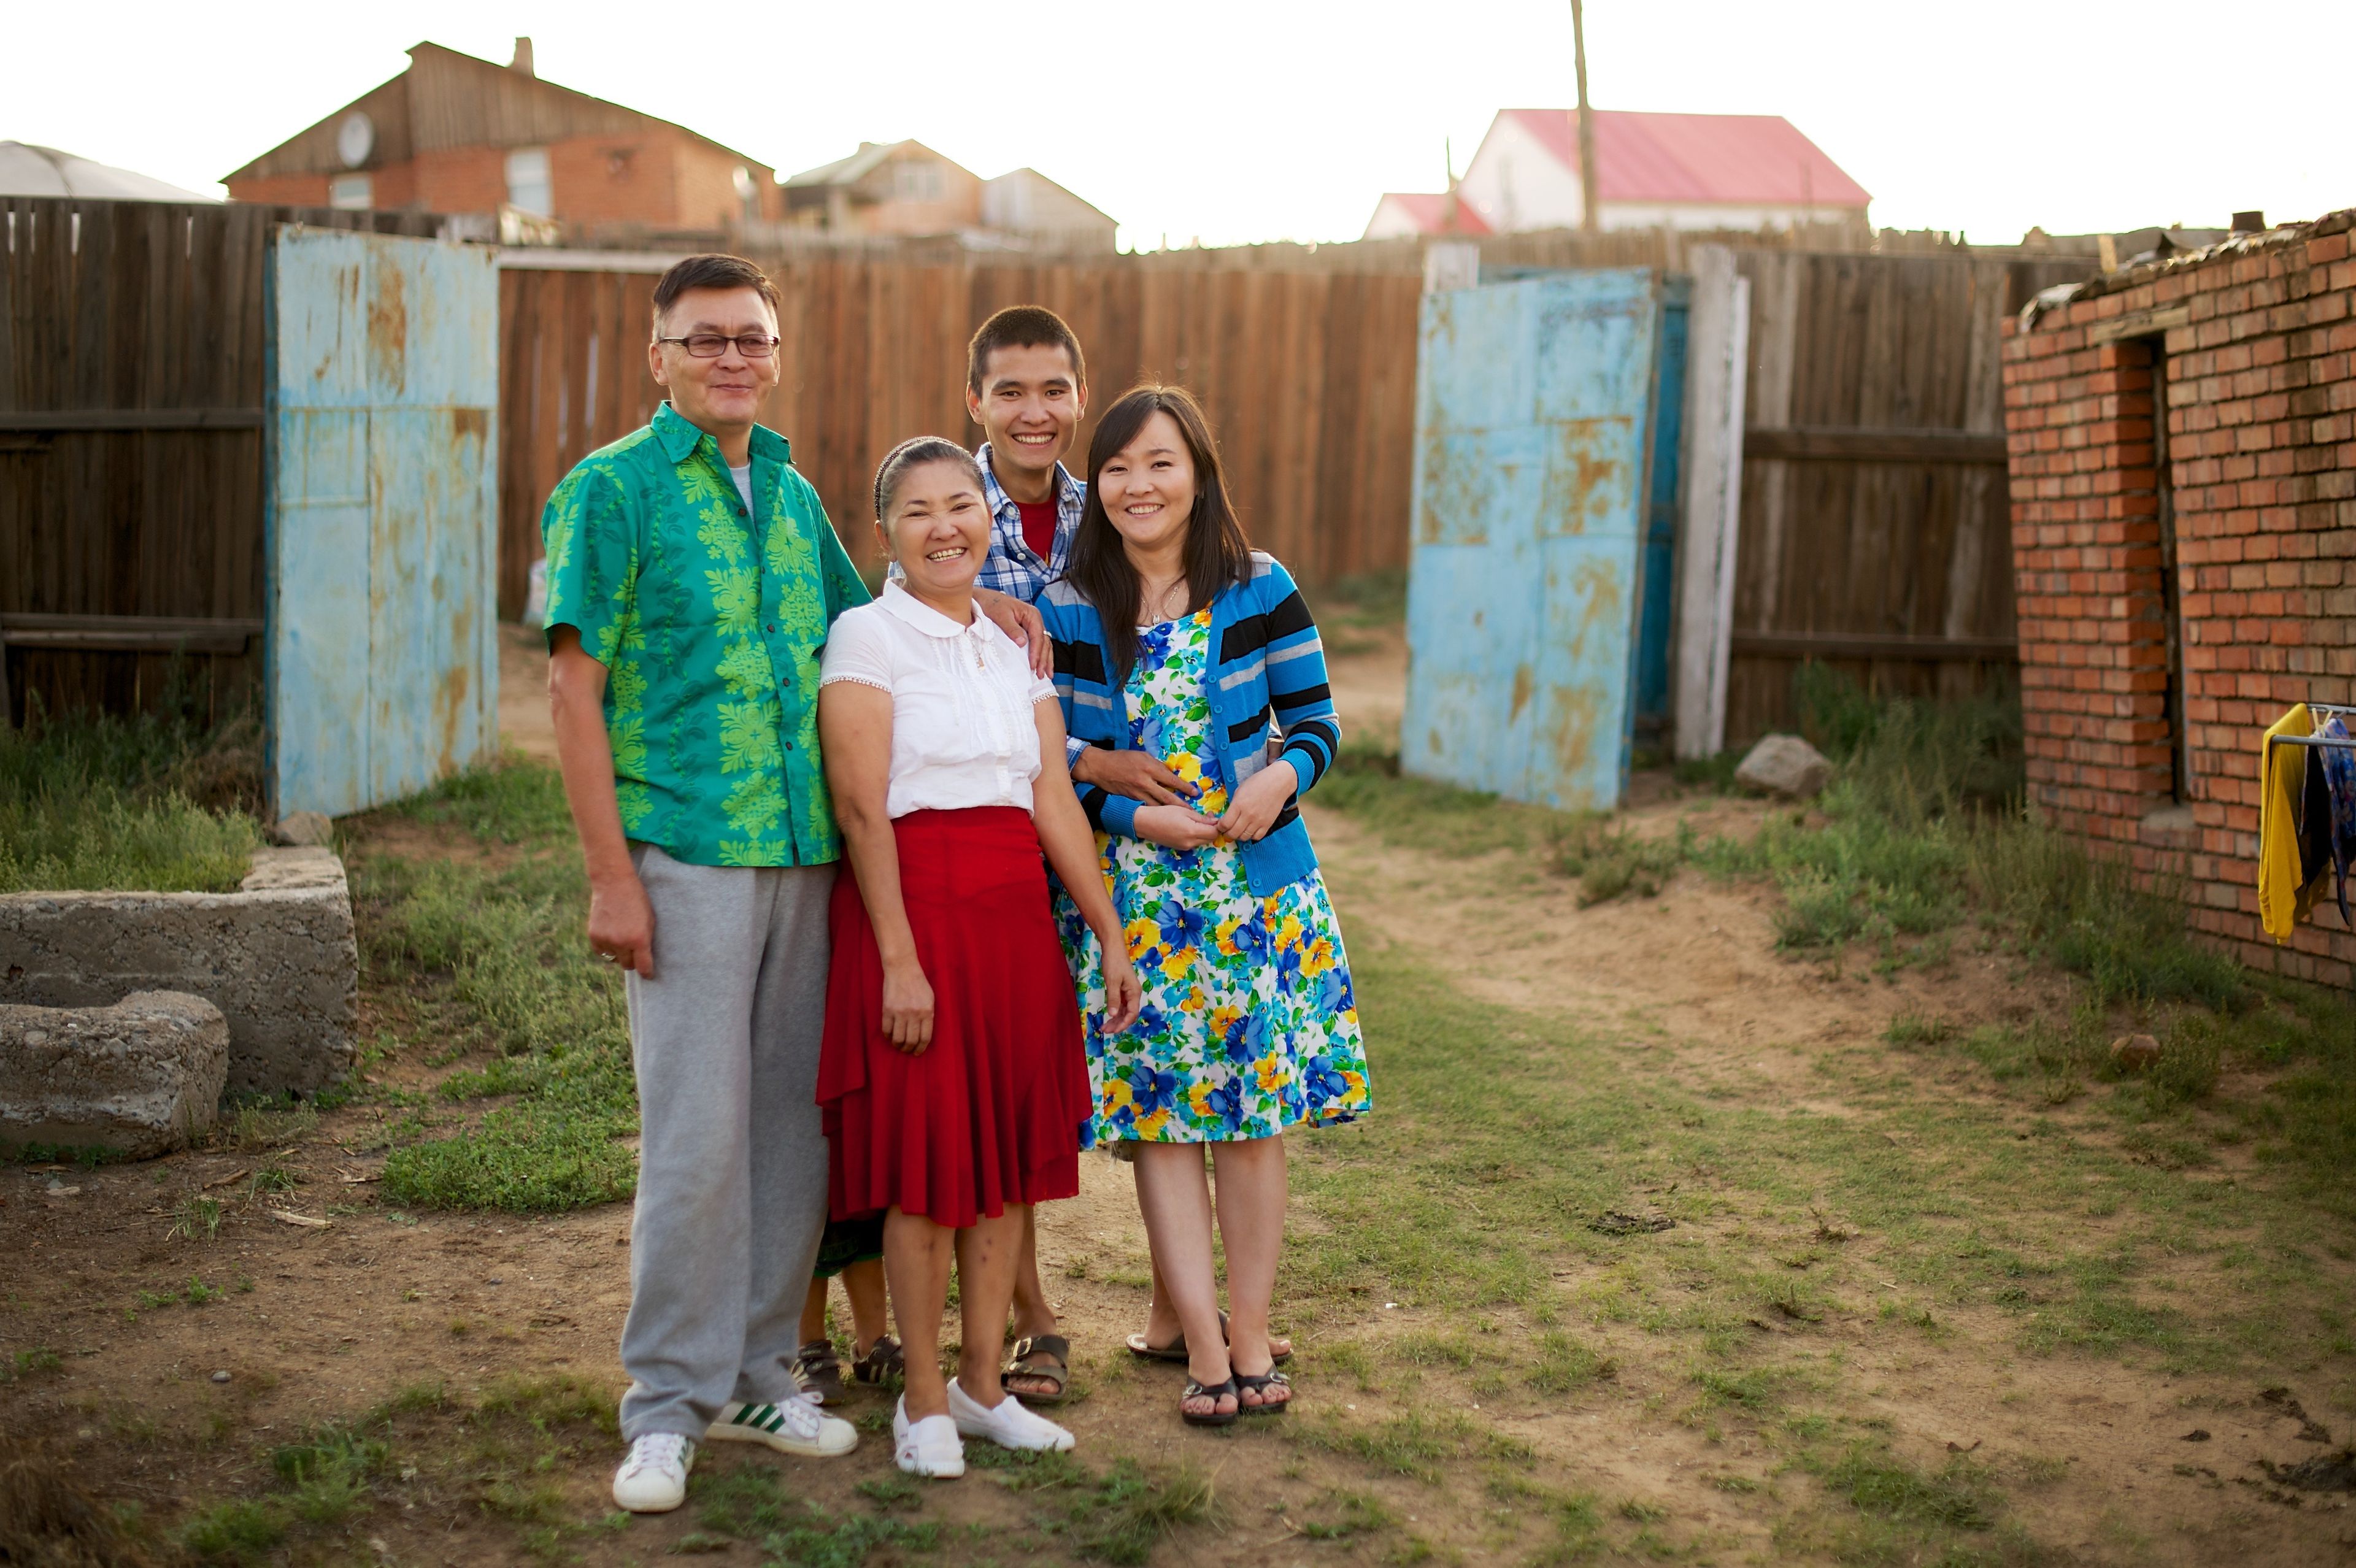 An outdoor portrait of members of a family in Mongolia.